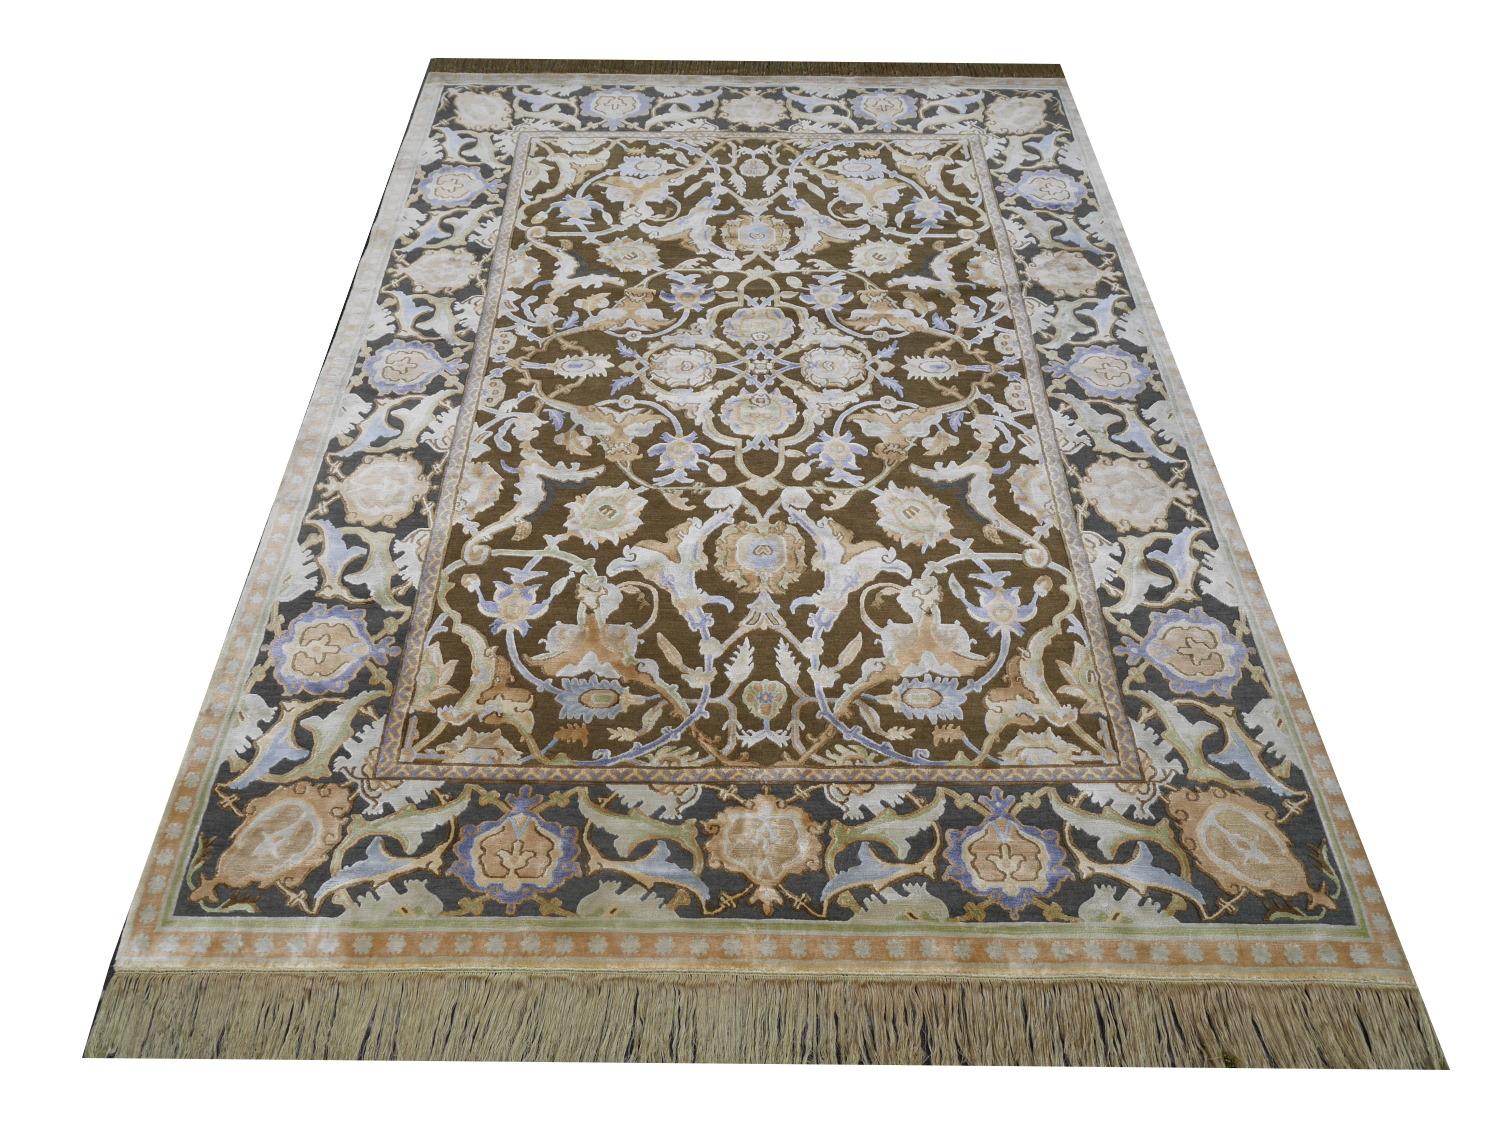 Contemporary Polonaise Rug Silk and Wool Antique Isfahan Design Bespoke Sizes For Sale